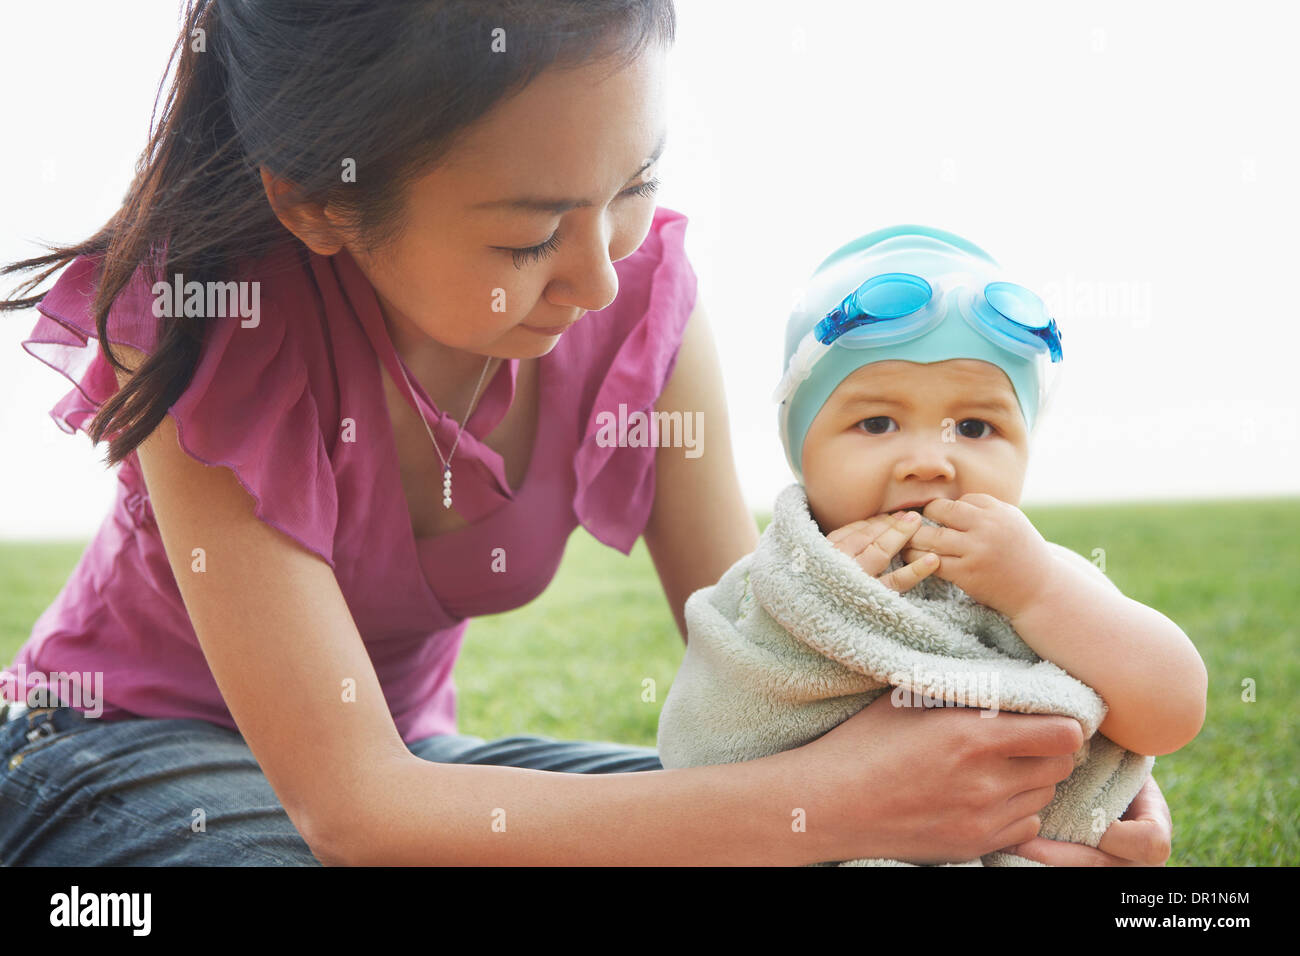 Mother wrapping baby in towel outdoors Stock Photo